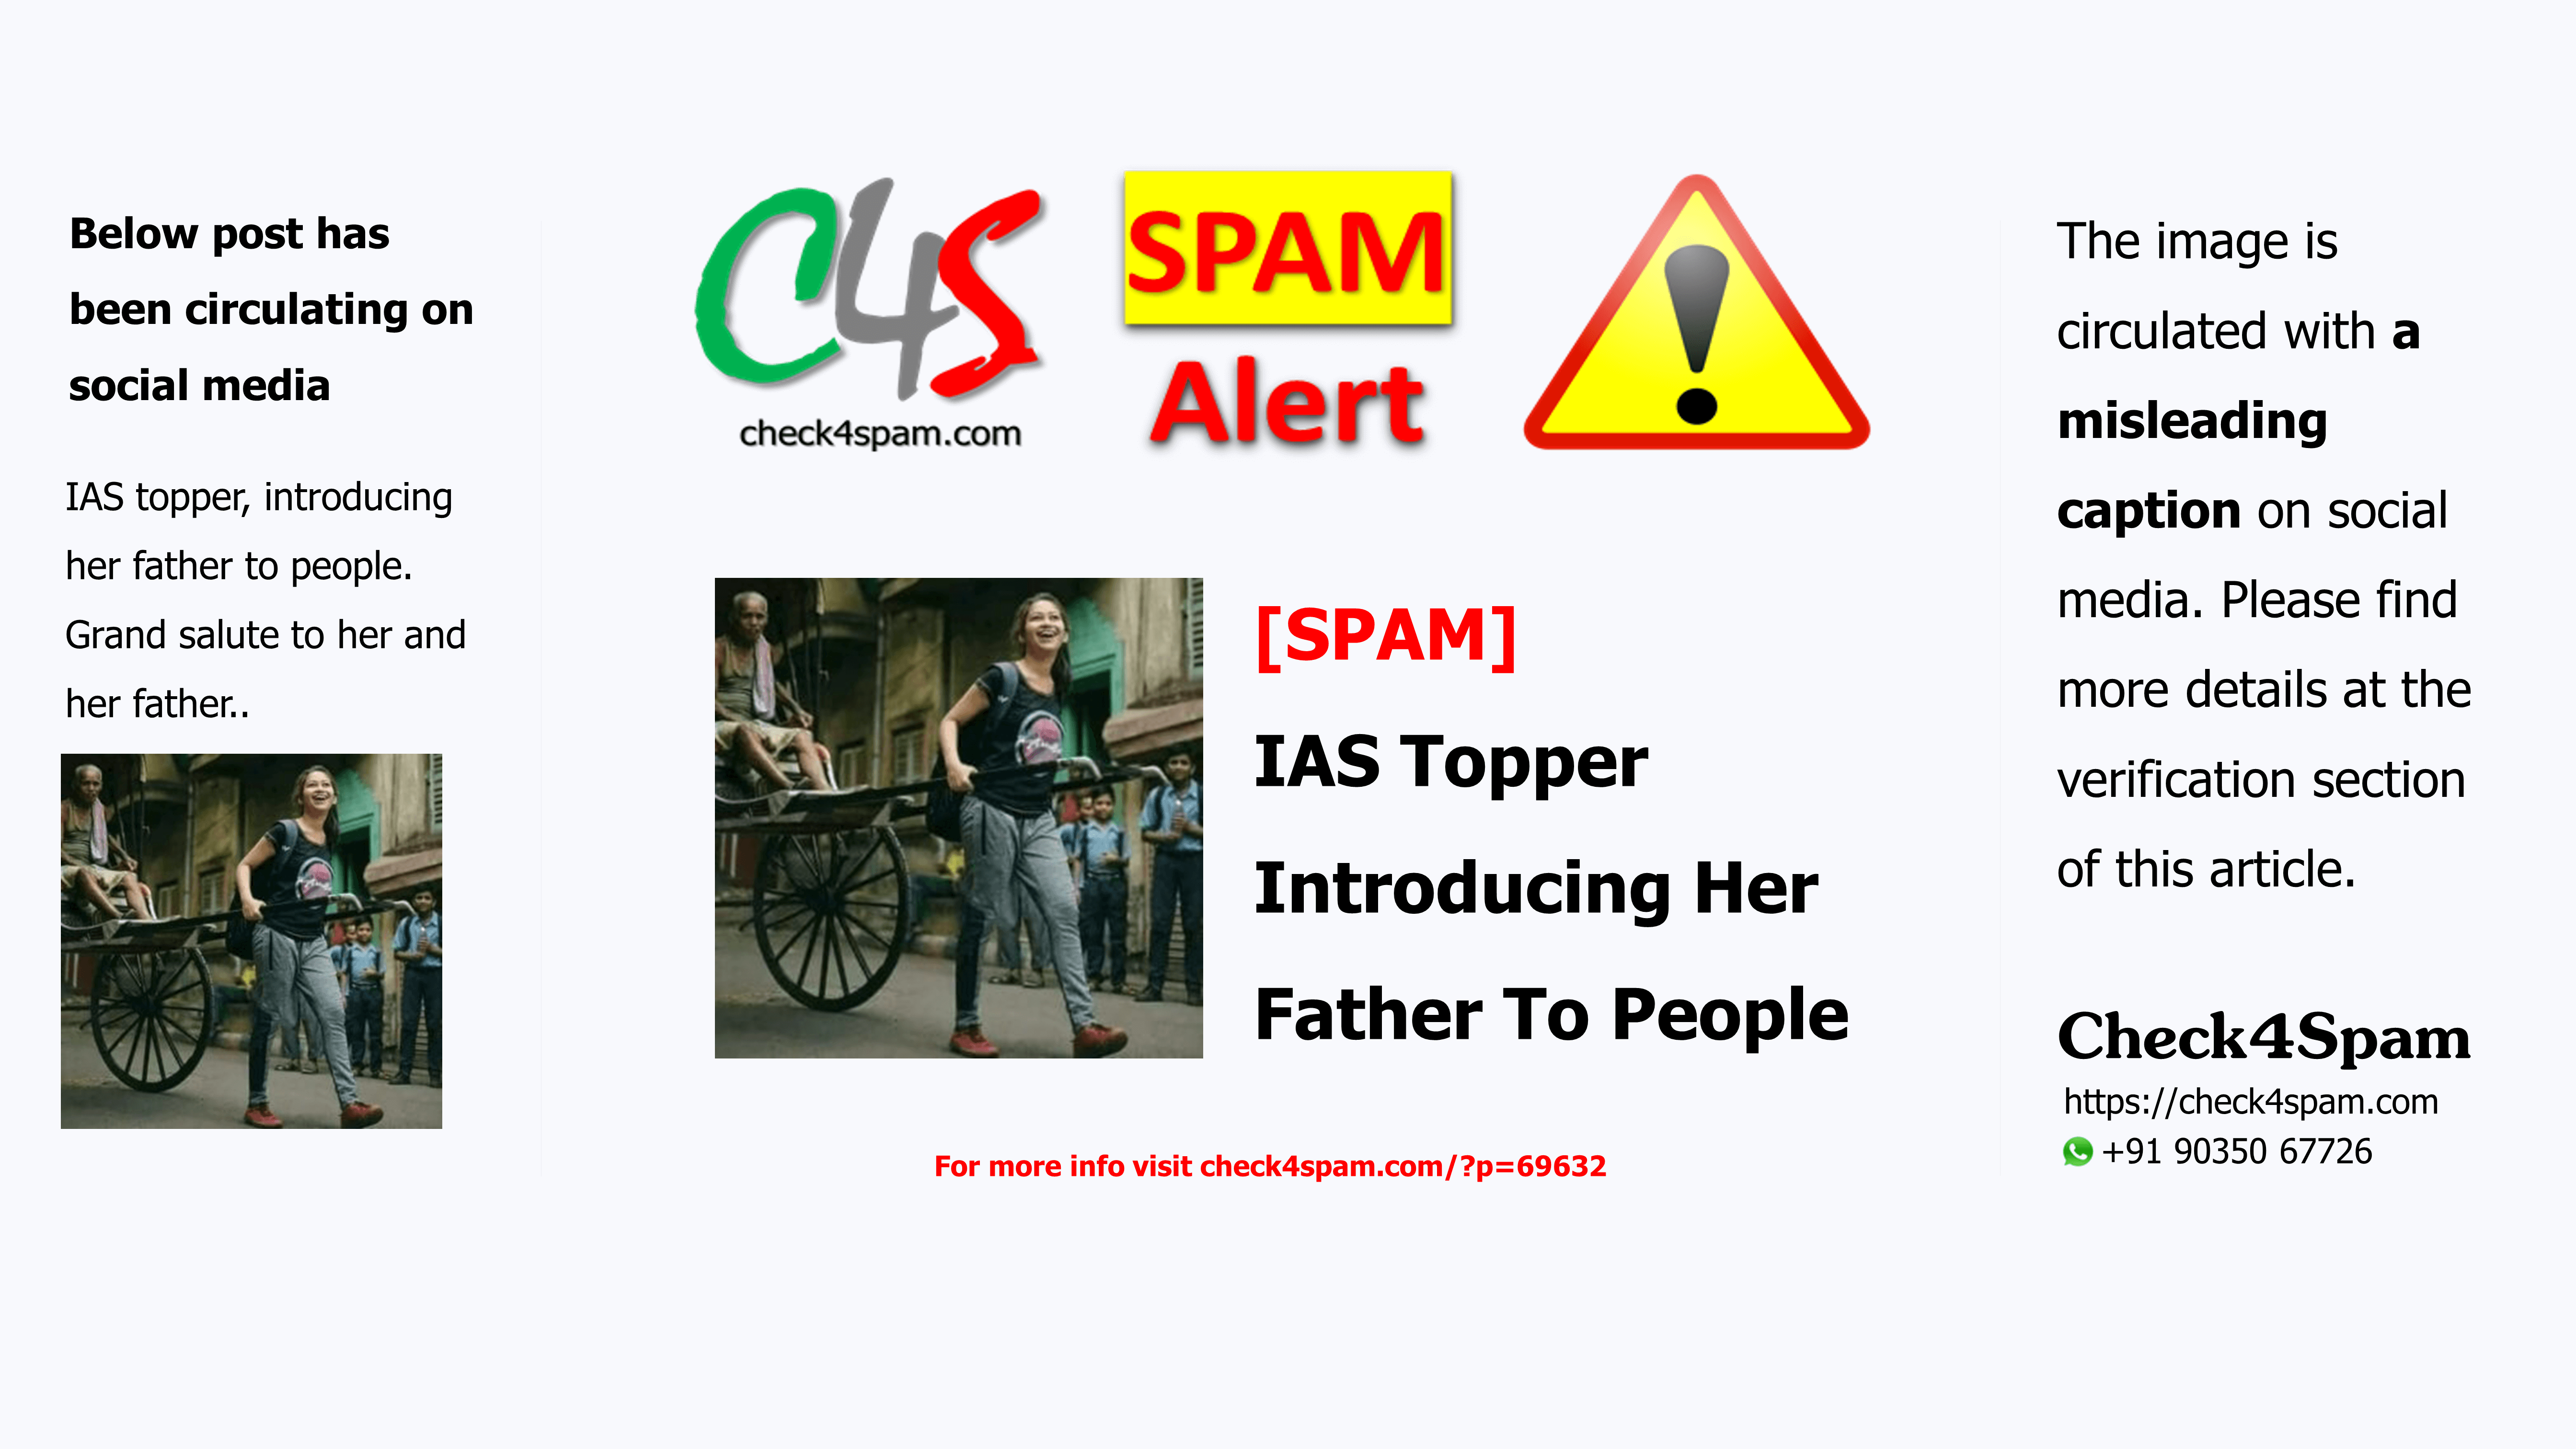 [SPAM] IAS Topper Introducing Her Father To People